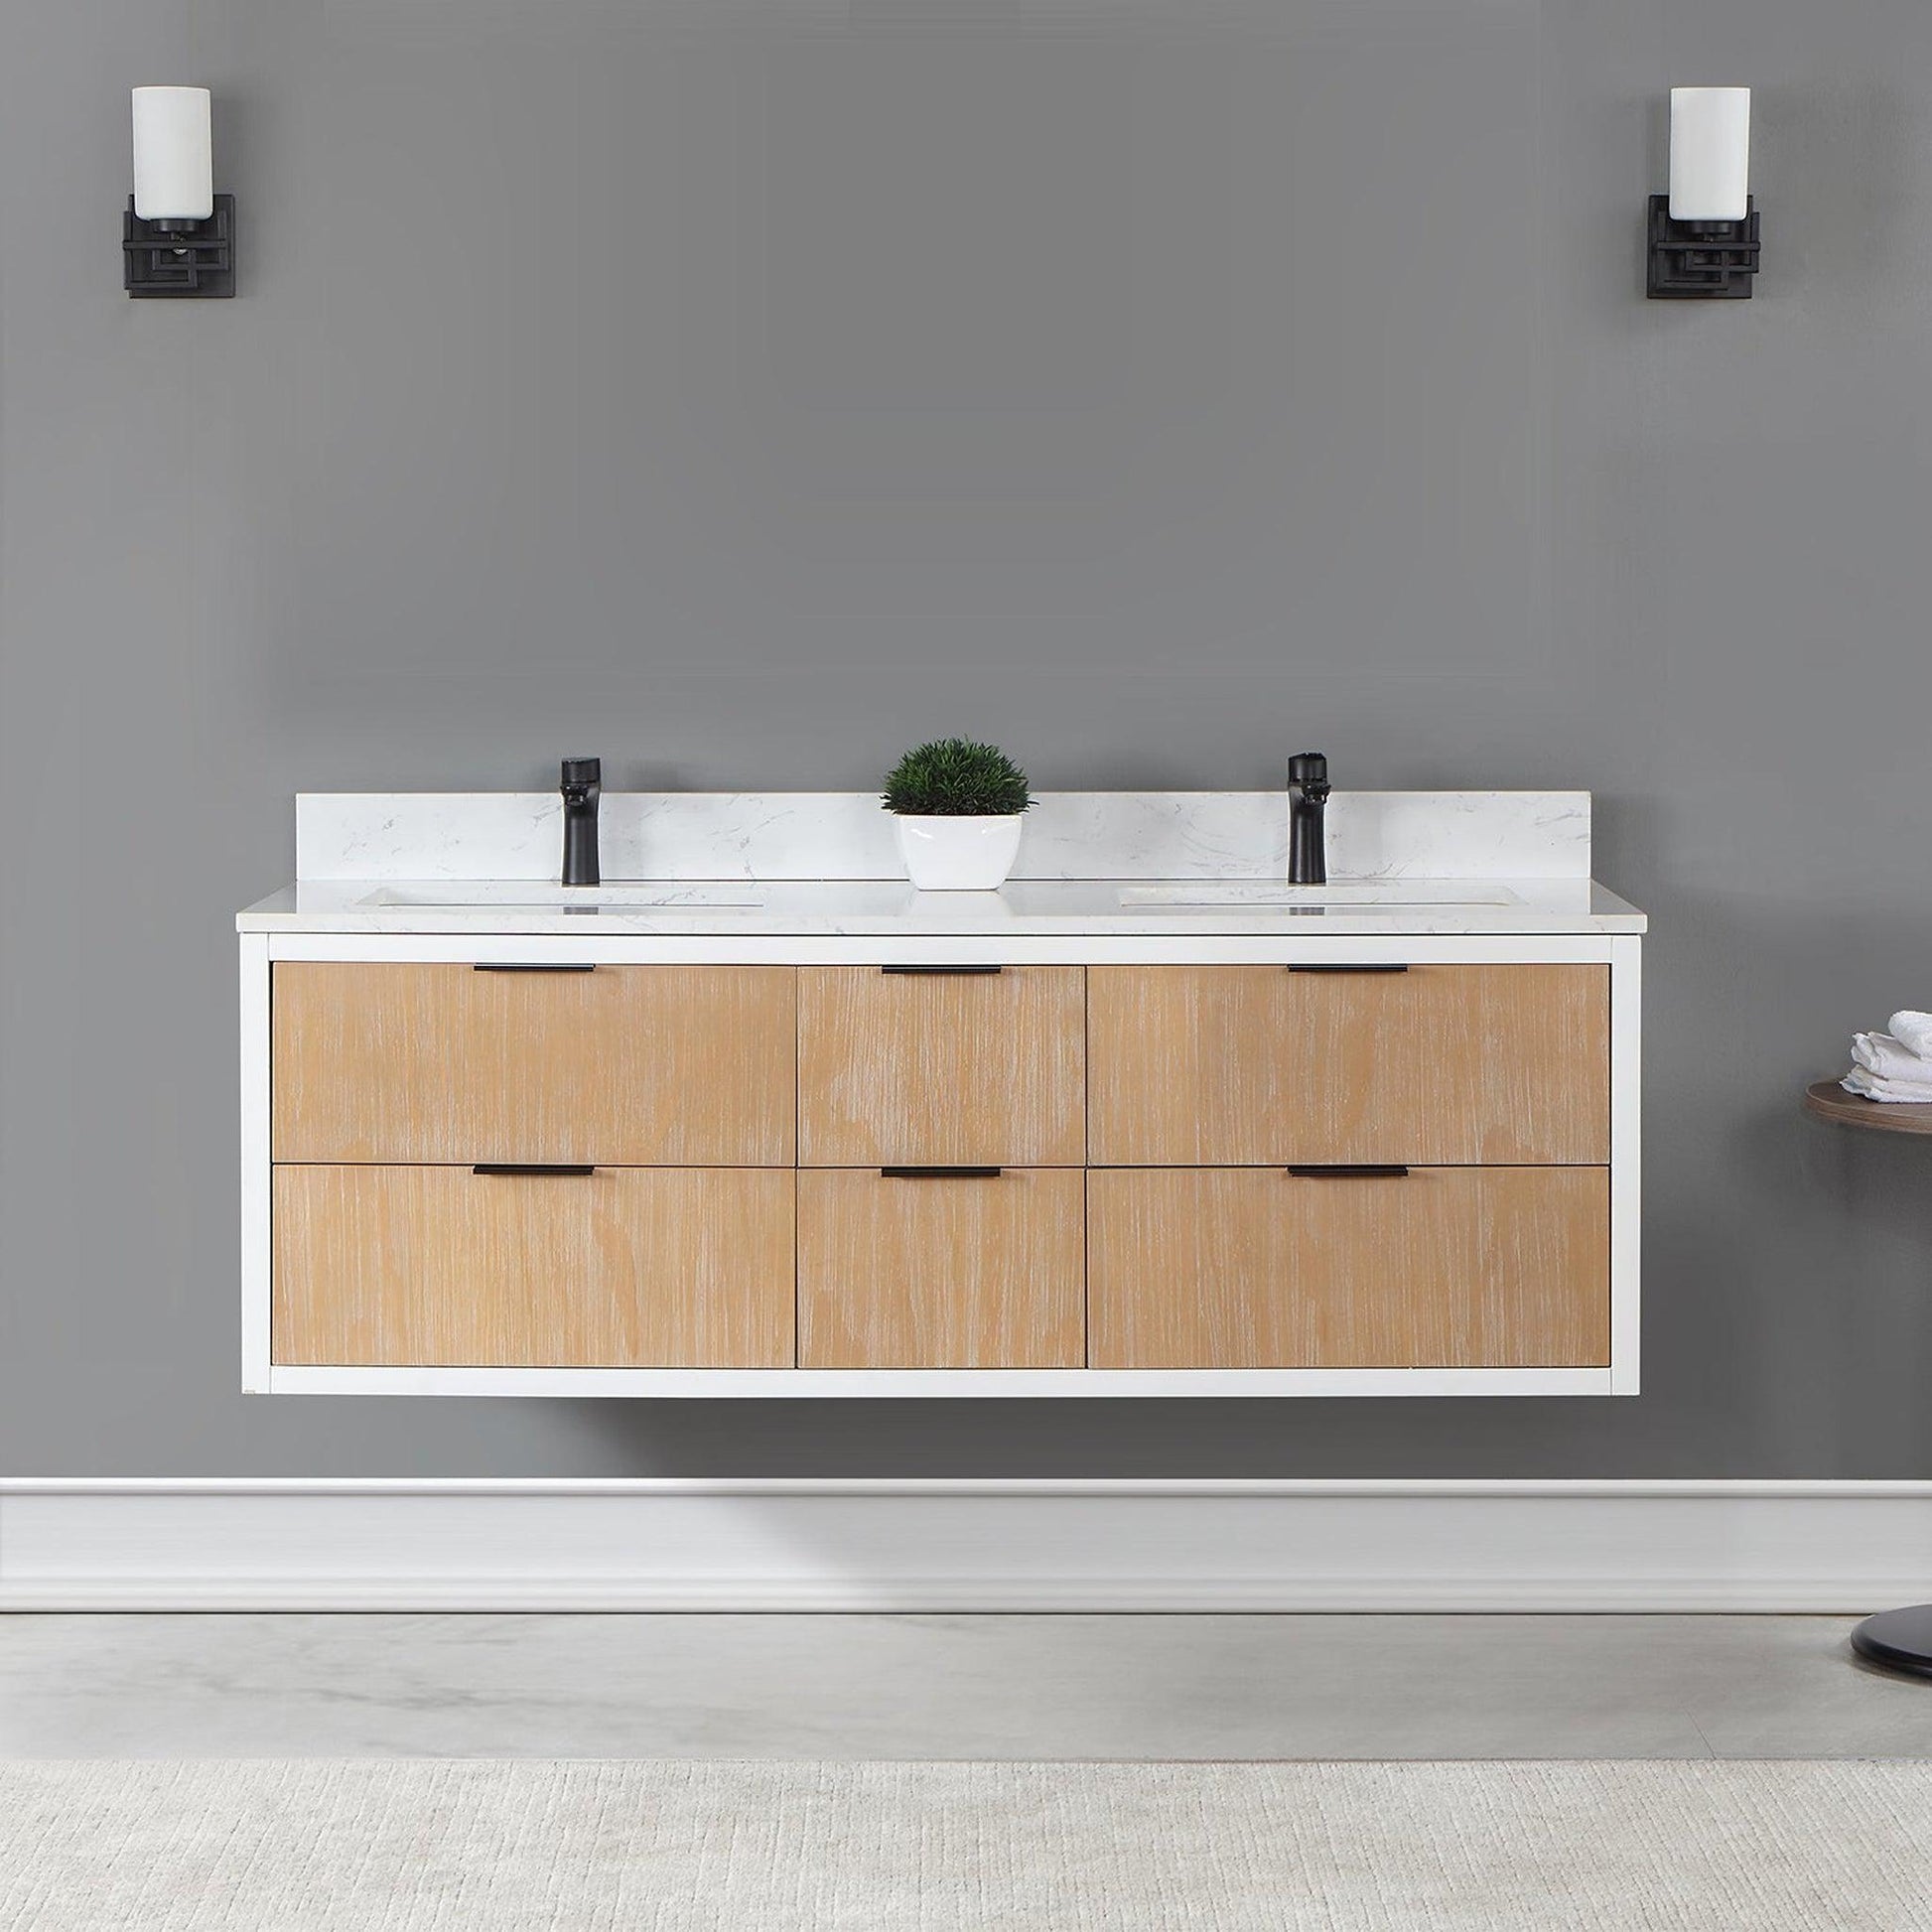 Altair Dione 60" Double Weathered Pine Wall-Mounted Bathroom Vanity Set With Aosta White Composite Stone Top, Double Rectangular Undermount Ceramic Sinks, Overflow, and Backsplash